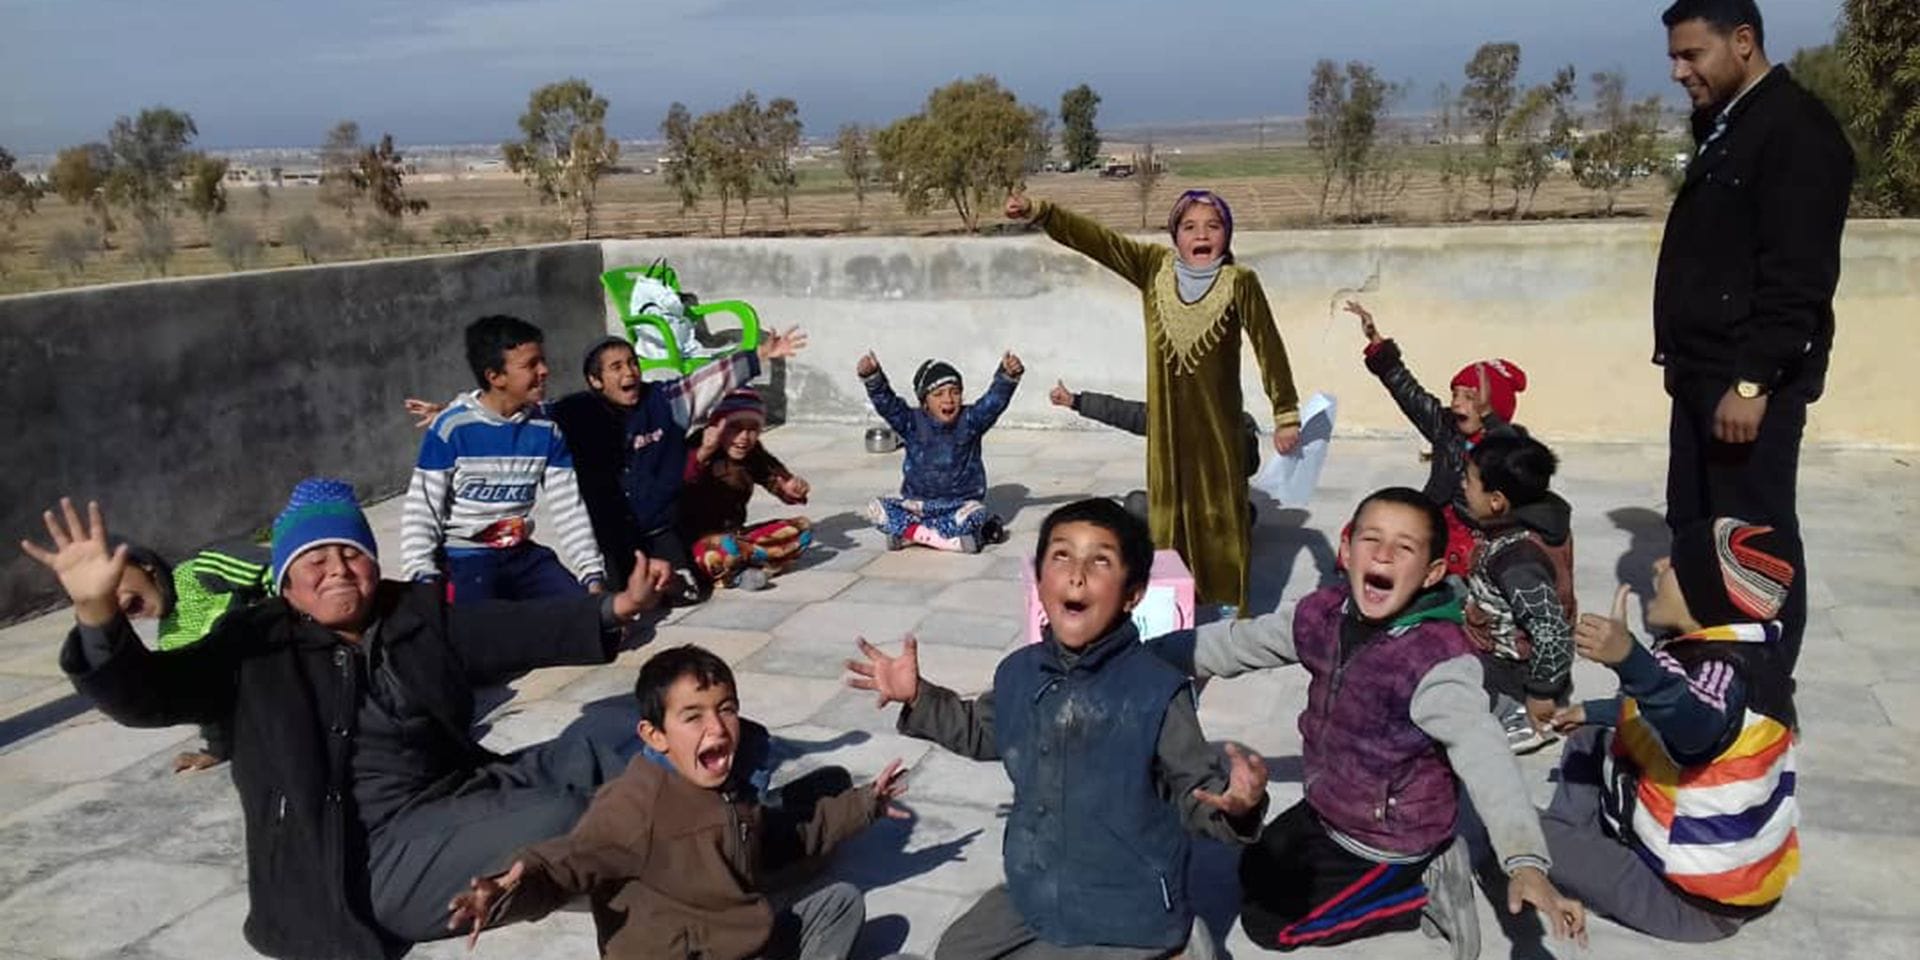 Syrian children sitting in a circle shout happily